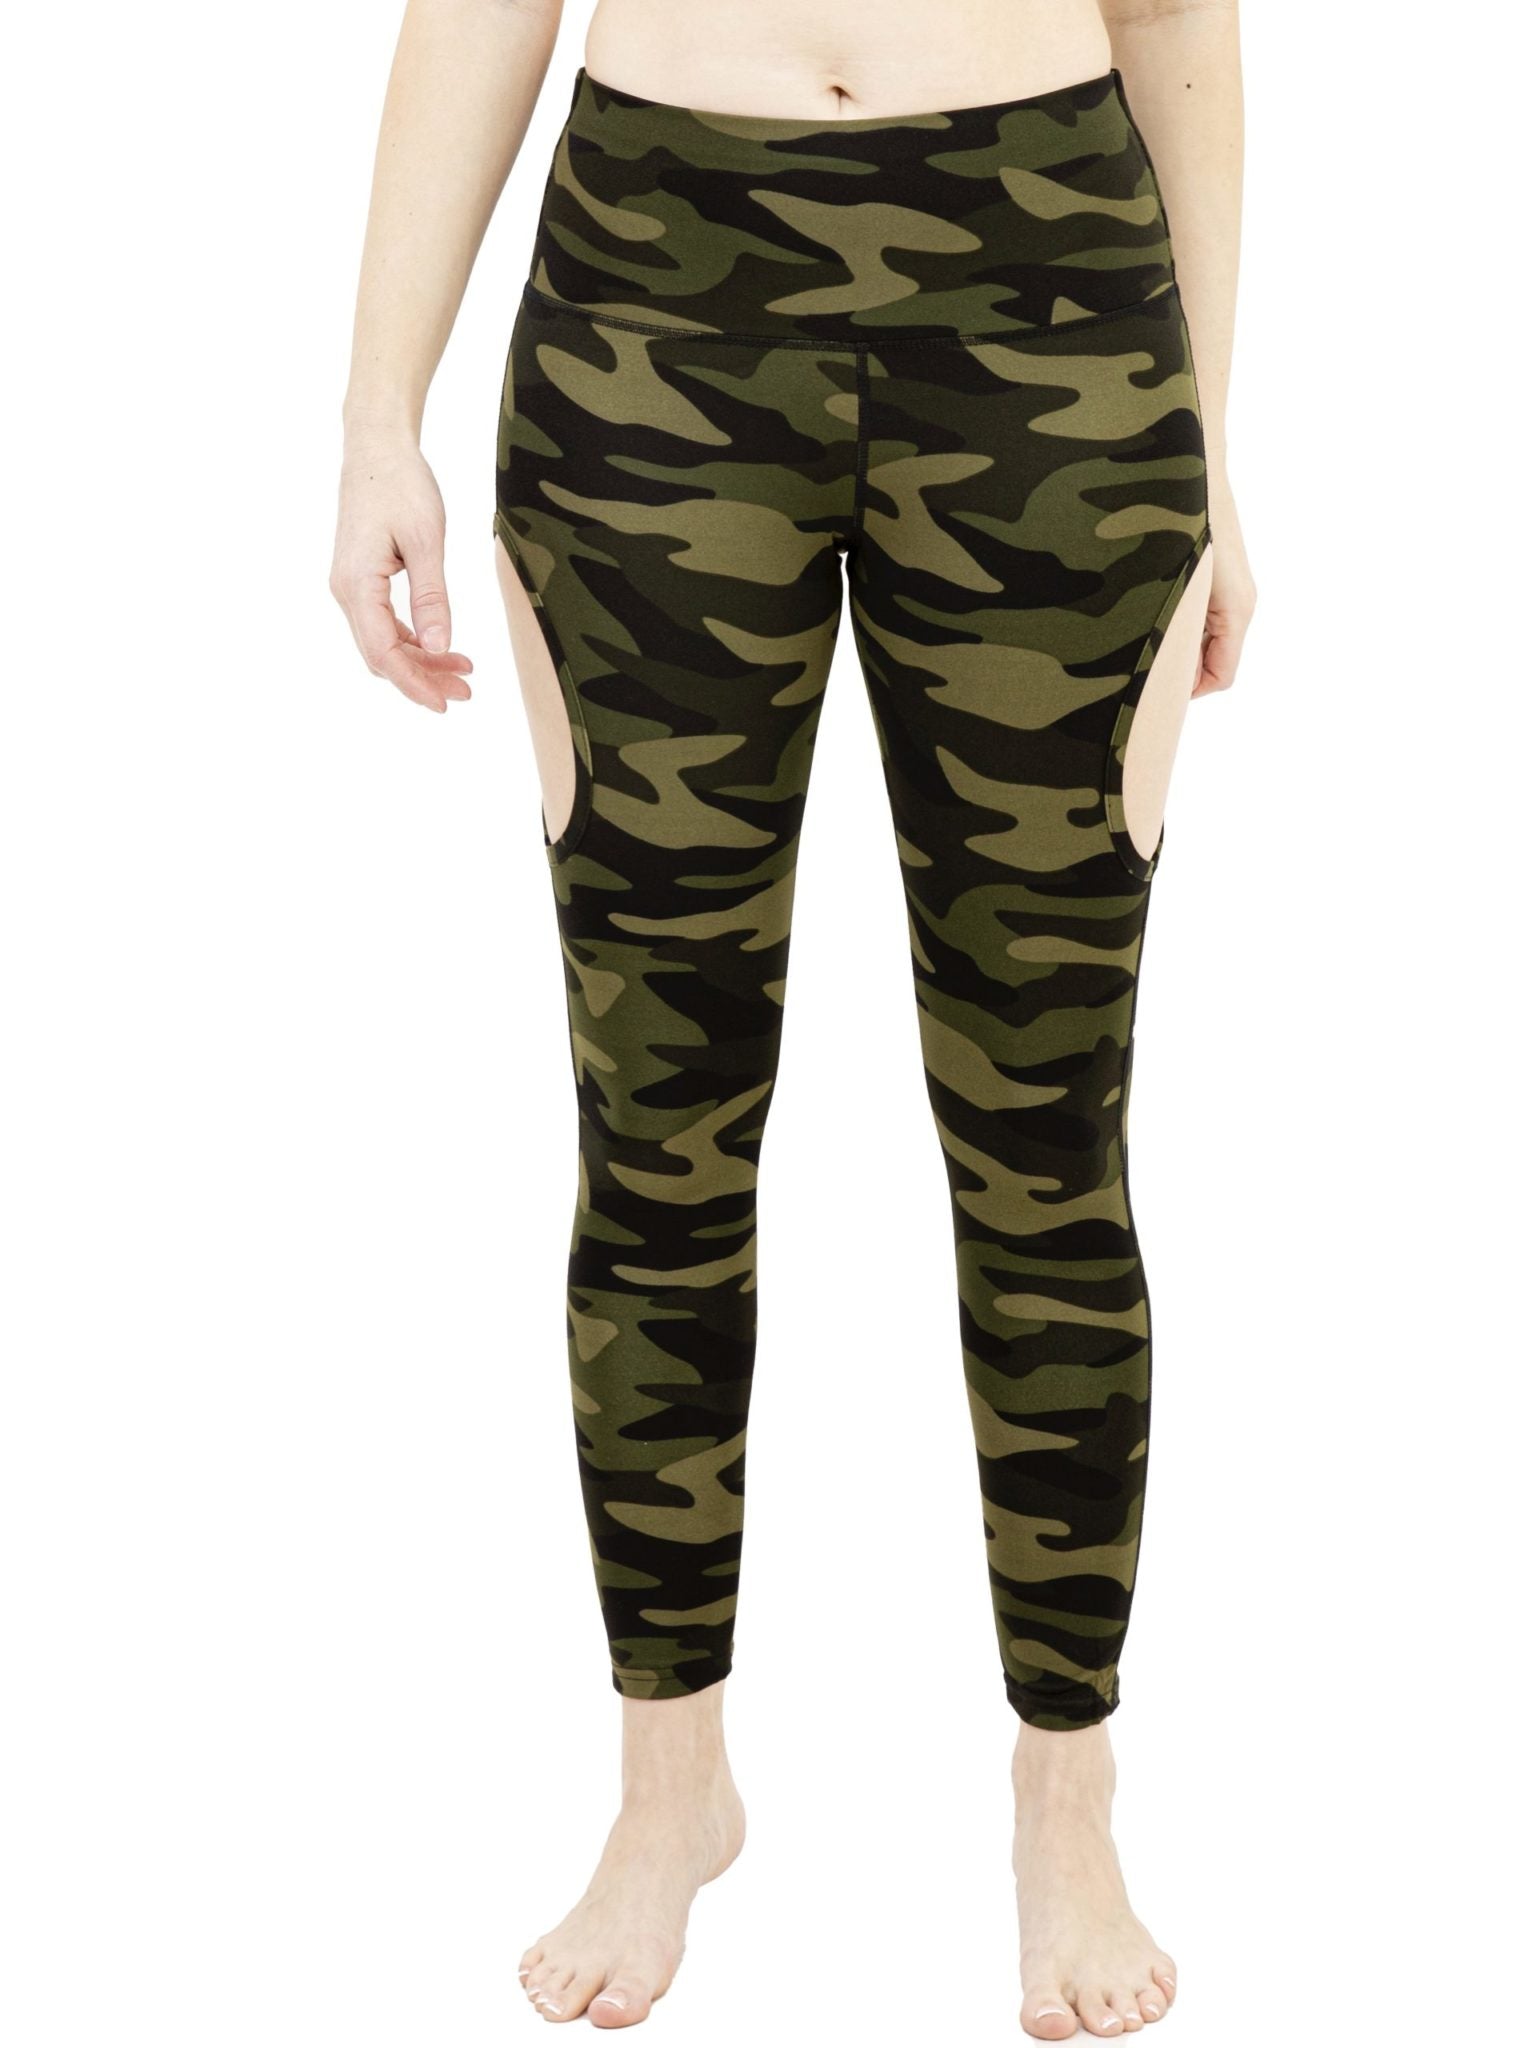 High-Waist Active Yoga Leggings with Cut-Out Sides